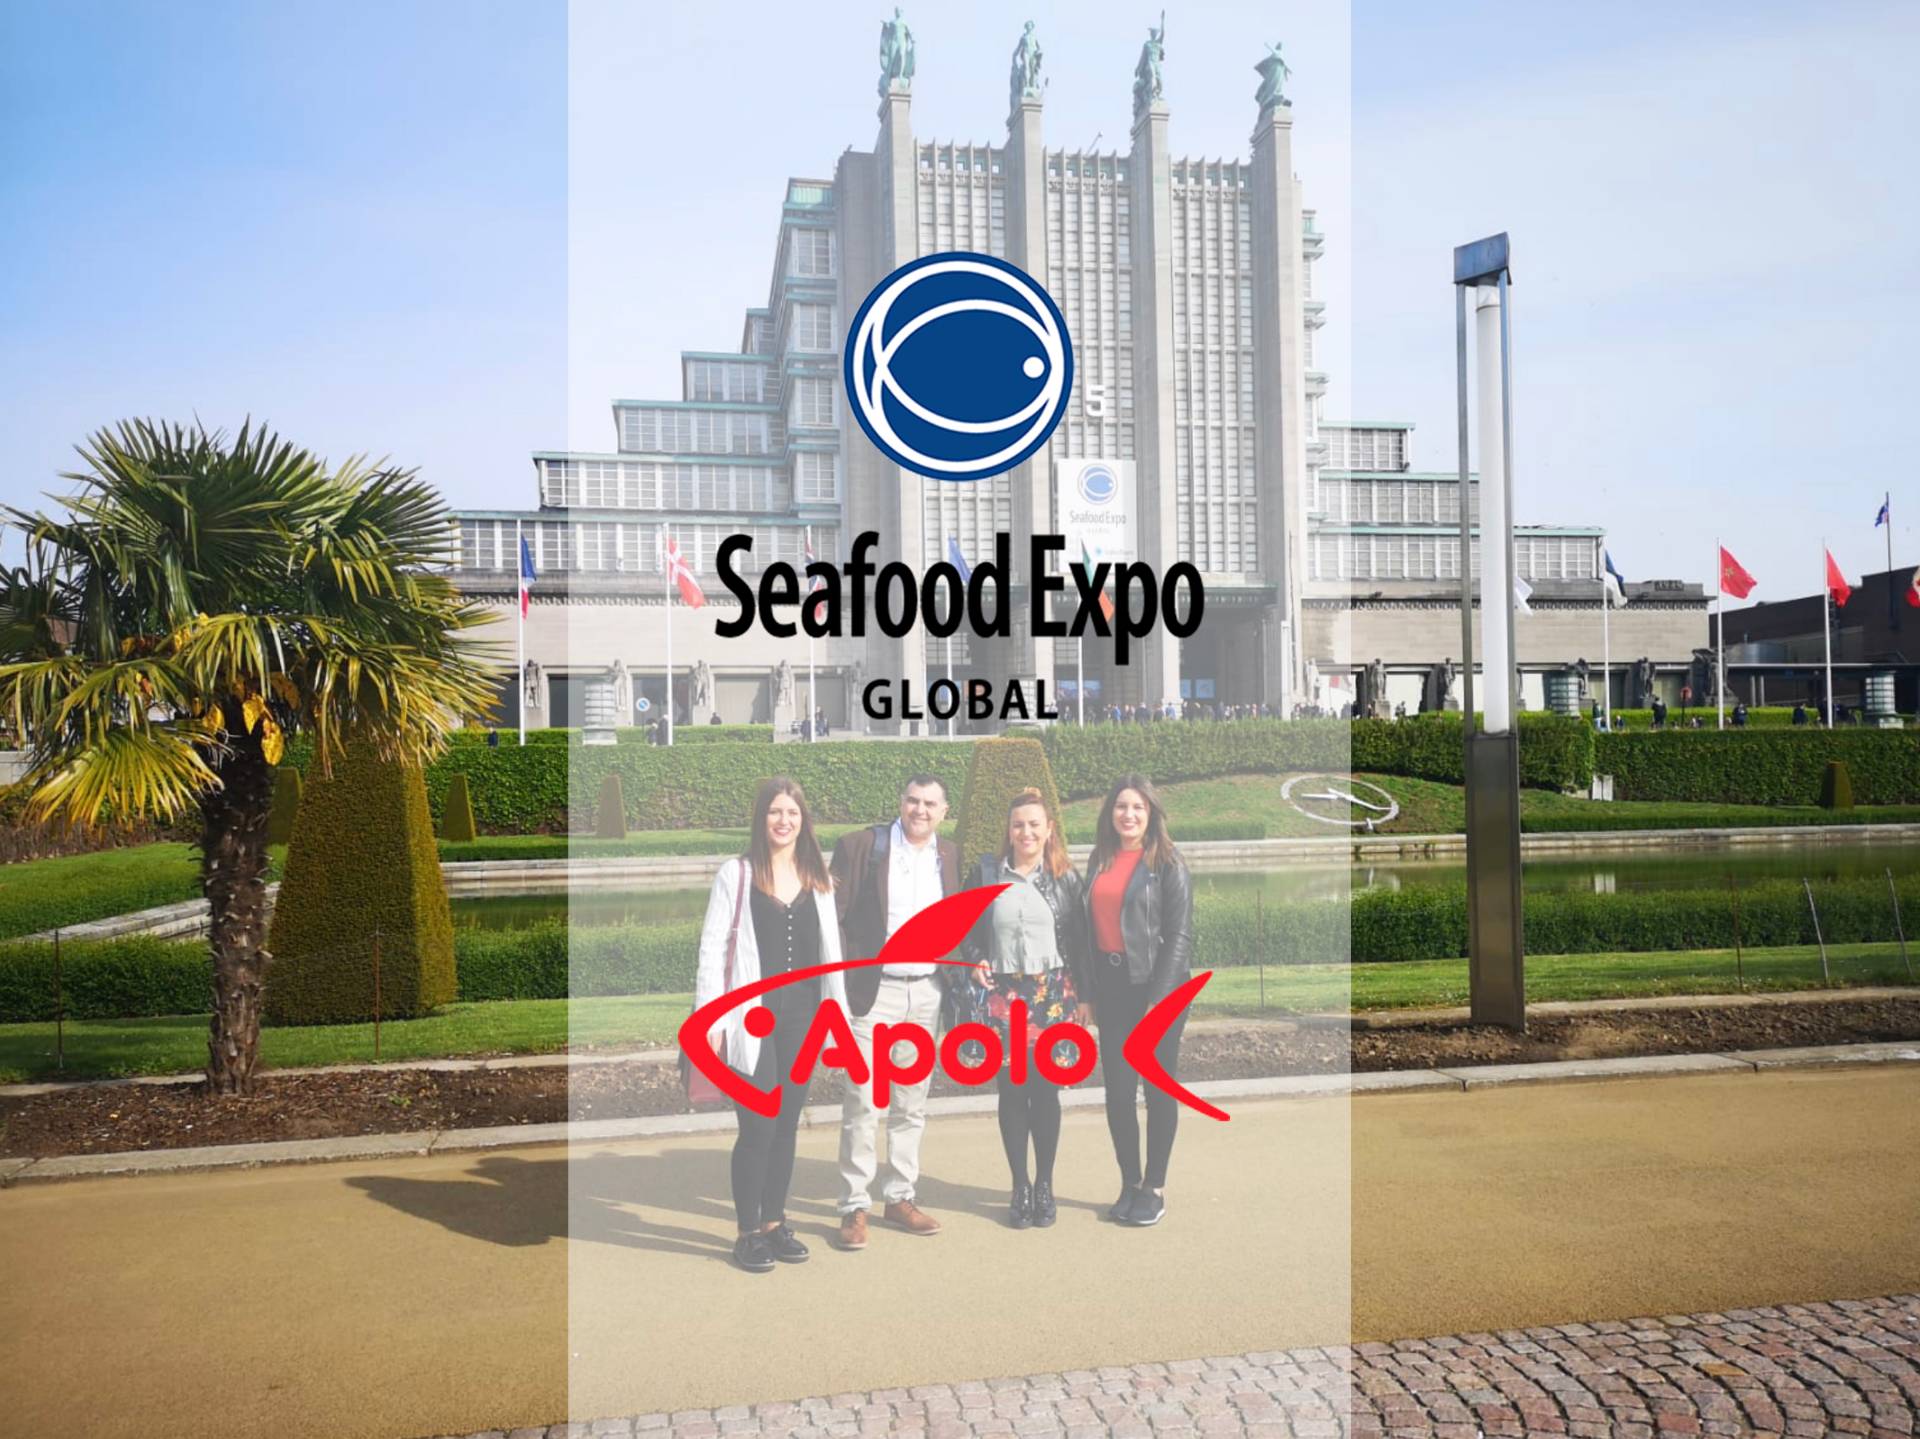 Apollo Seafood at the Seafood Expo Global - Corporate News